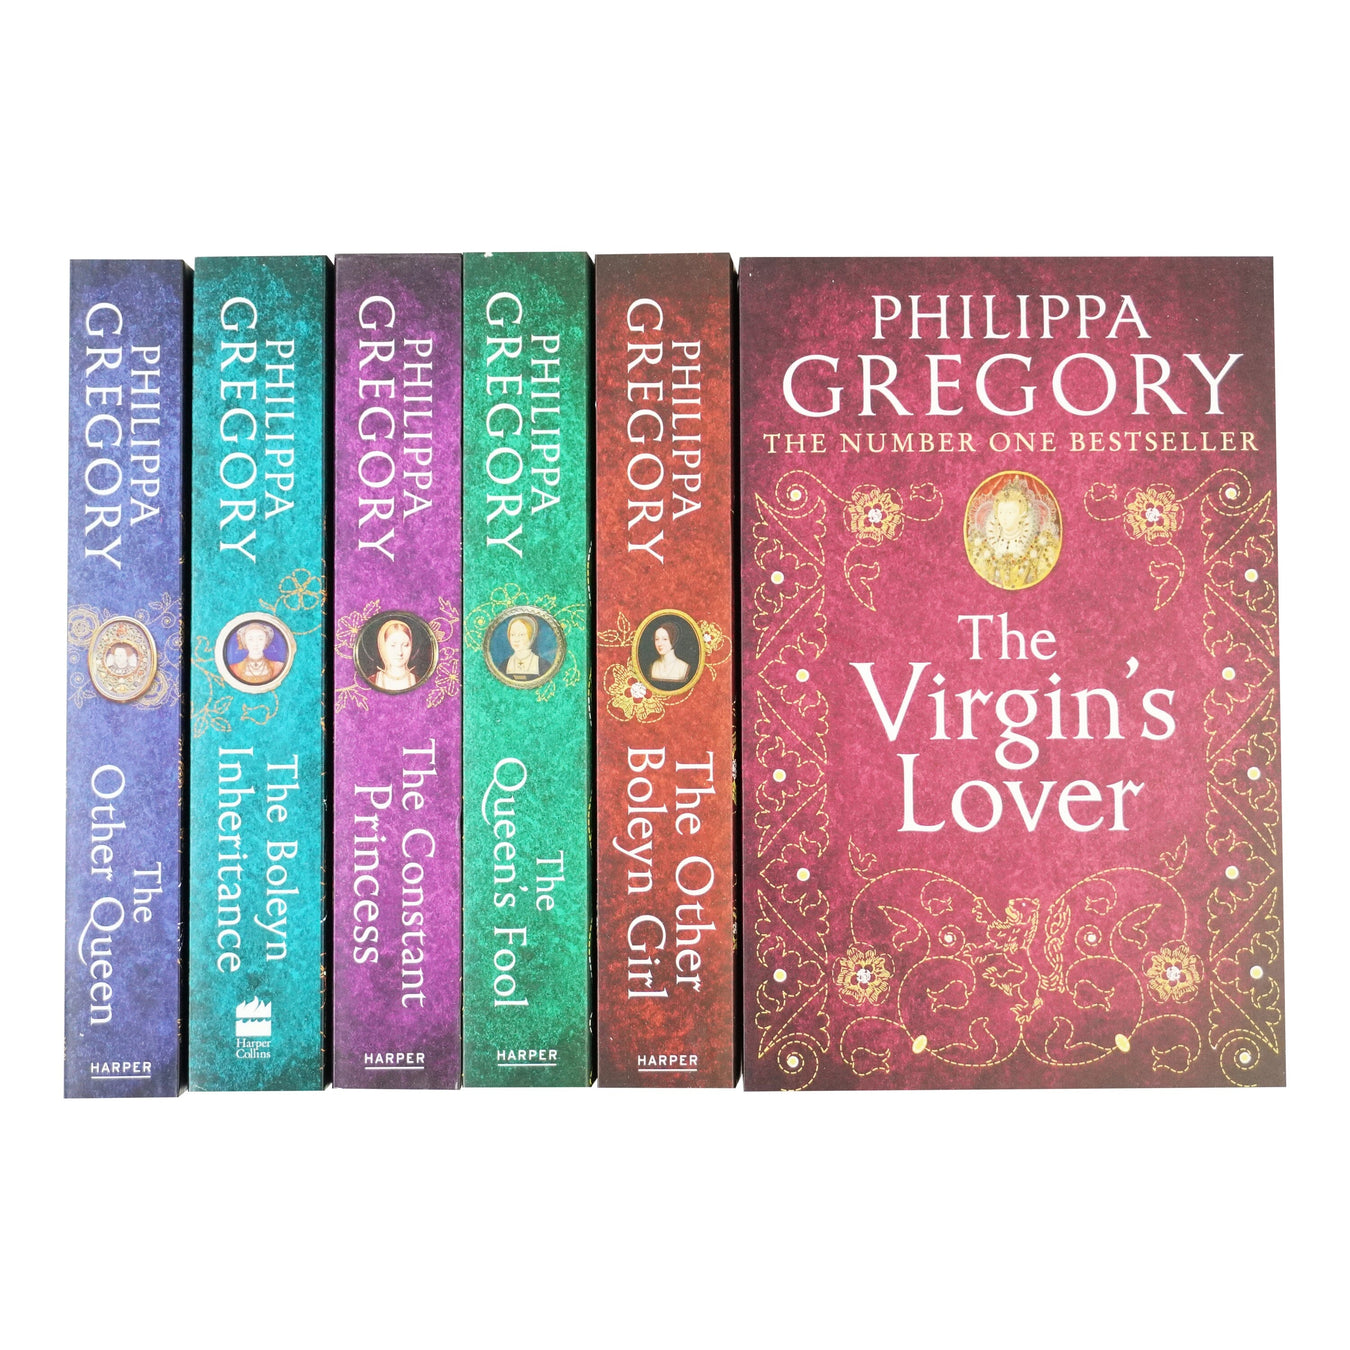 Tudor Court Novels 6 Books Collection Set By Philippa Gregory - Fiction - Paperback Fiction HarperCollins Publishers